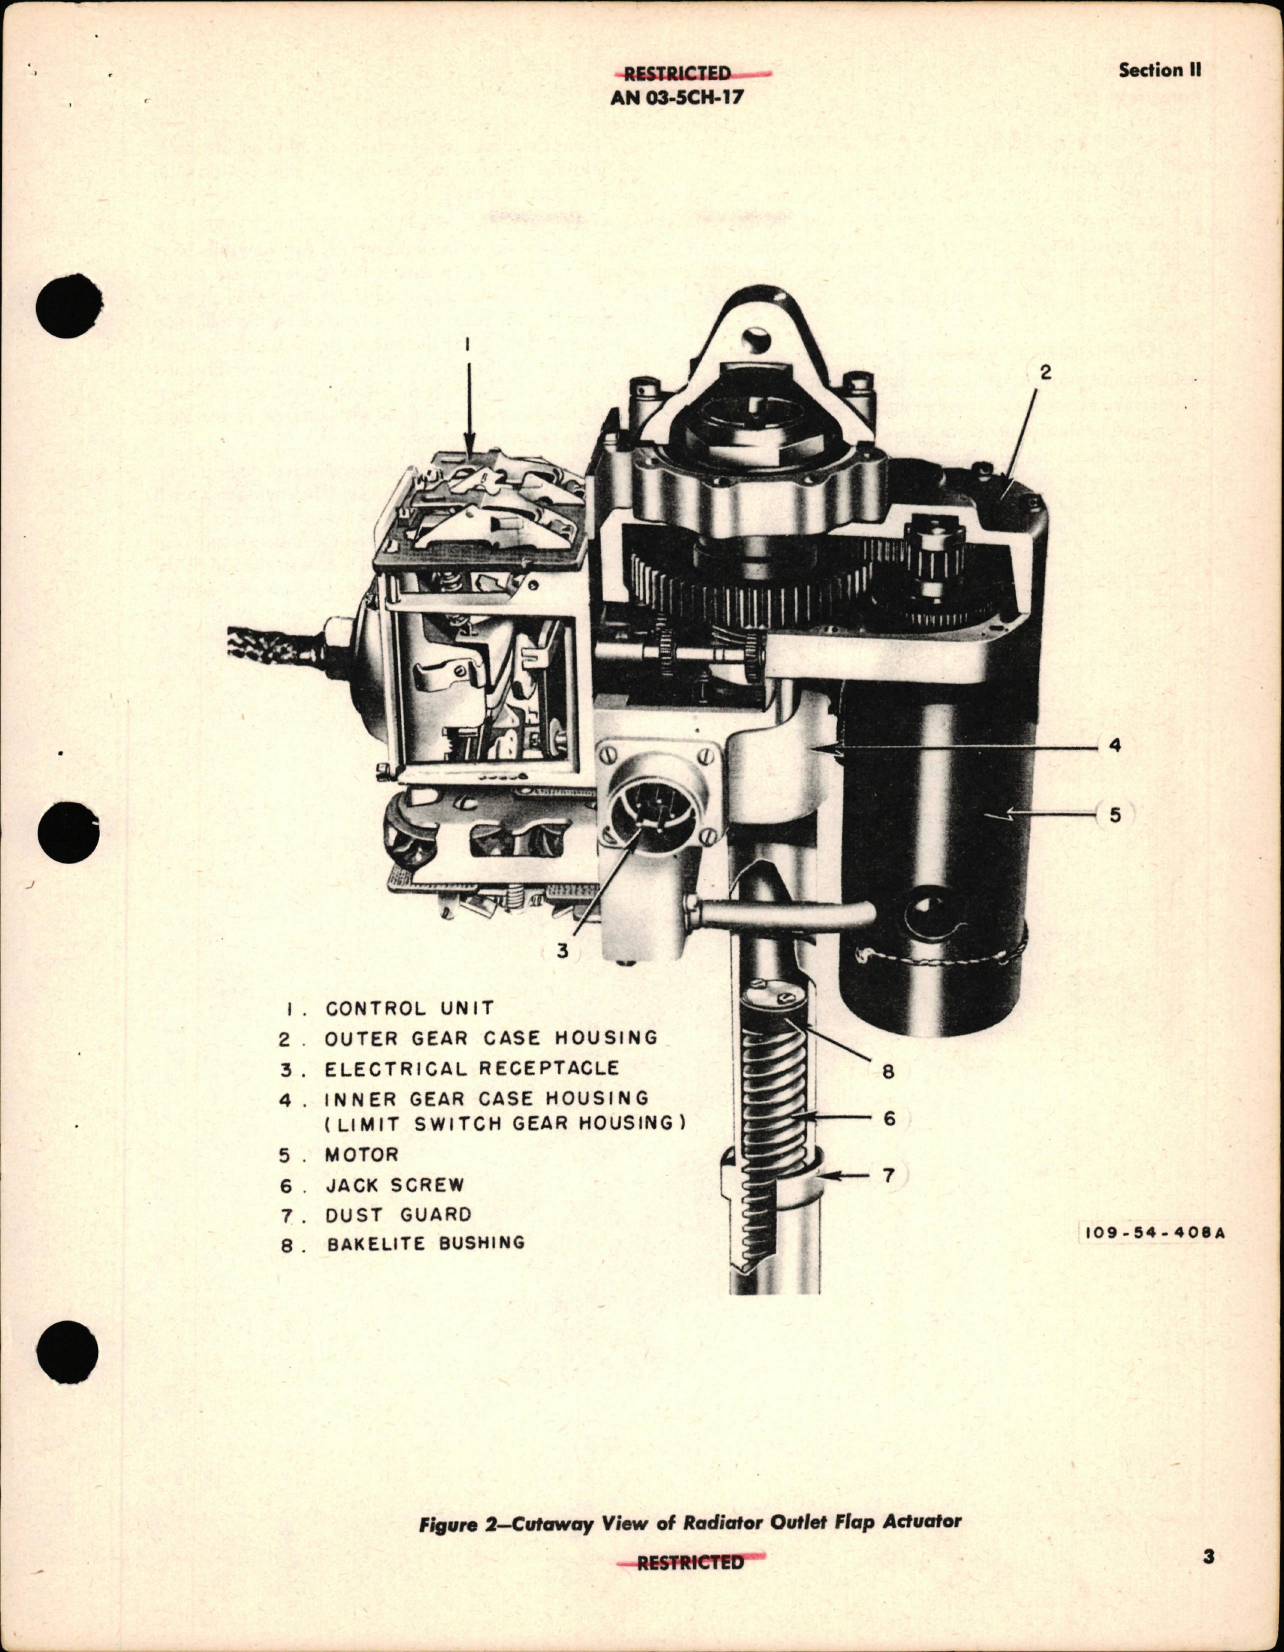 Sample page 7 from AirCorps Library document:  Operation, Service, & Overhaul Instructions with Parts Catalog for Thermostatic Actuators Models R-4250 and R-4310